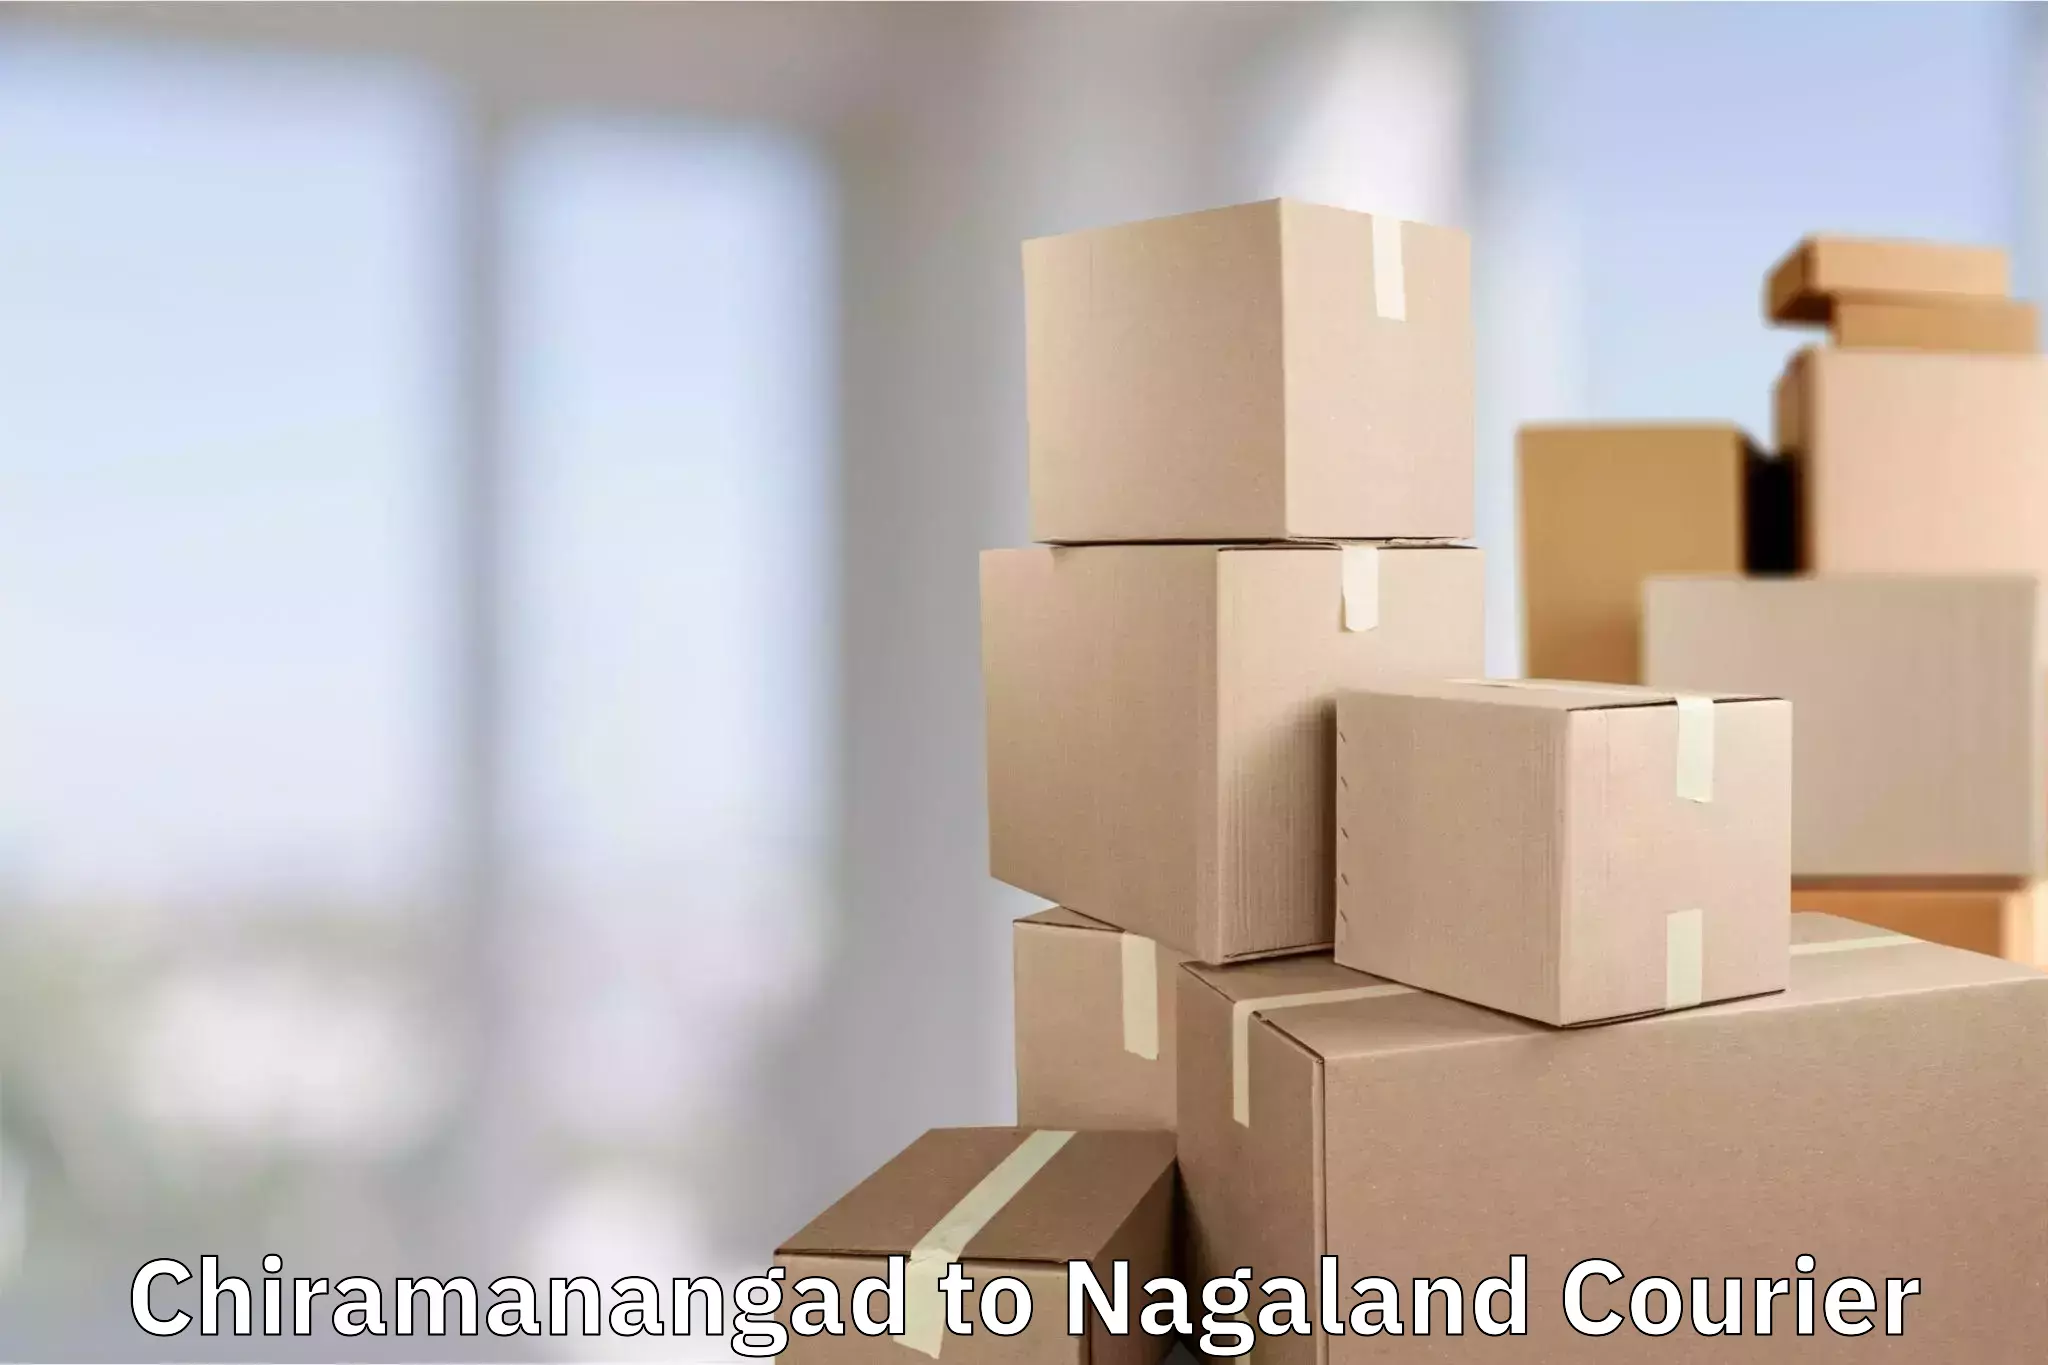 Luggage transport consultancy in Chiramanangad to Nagaland